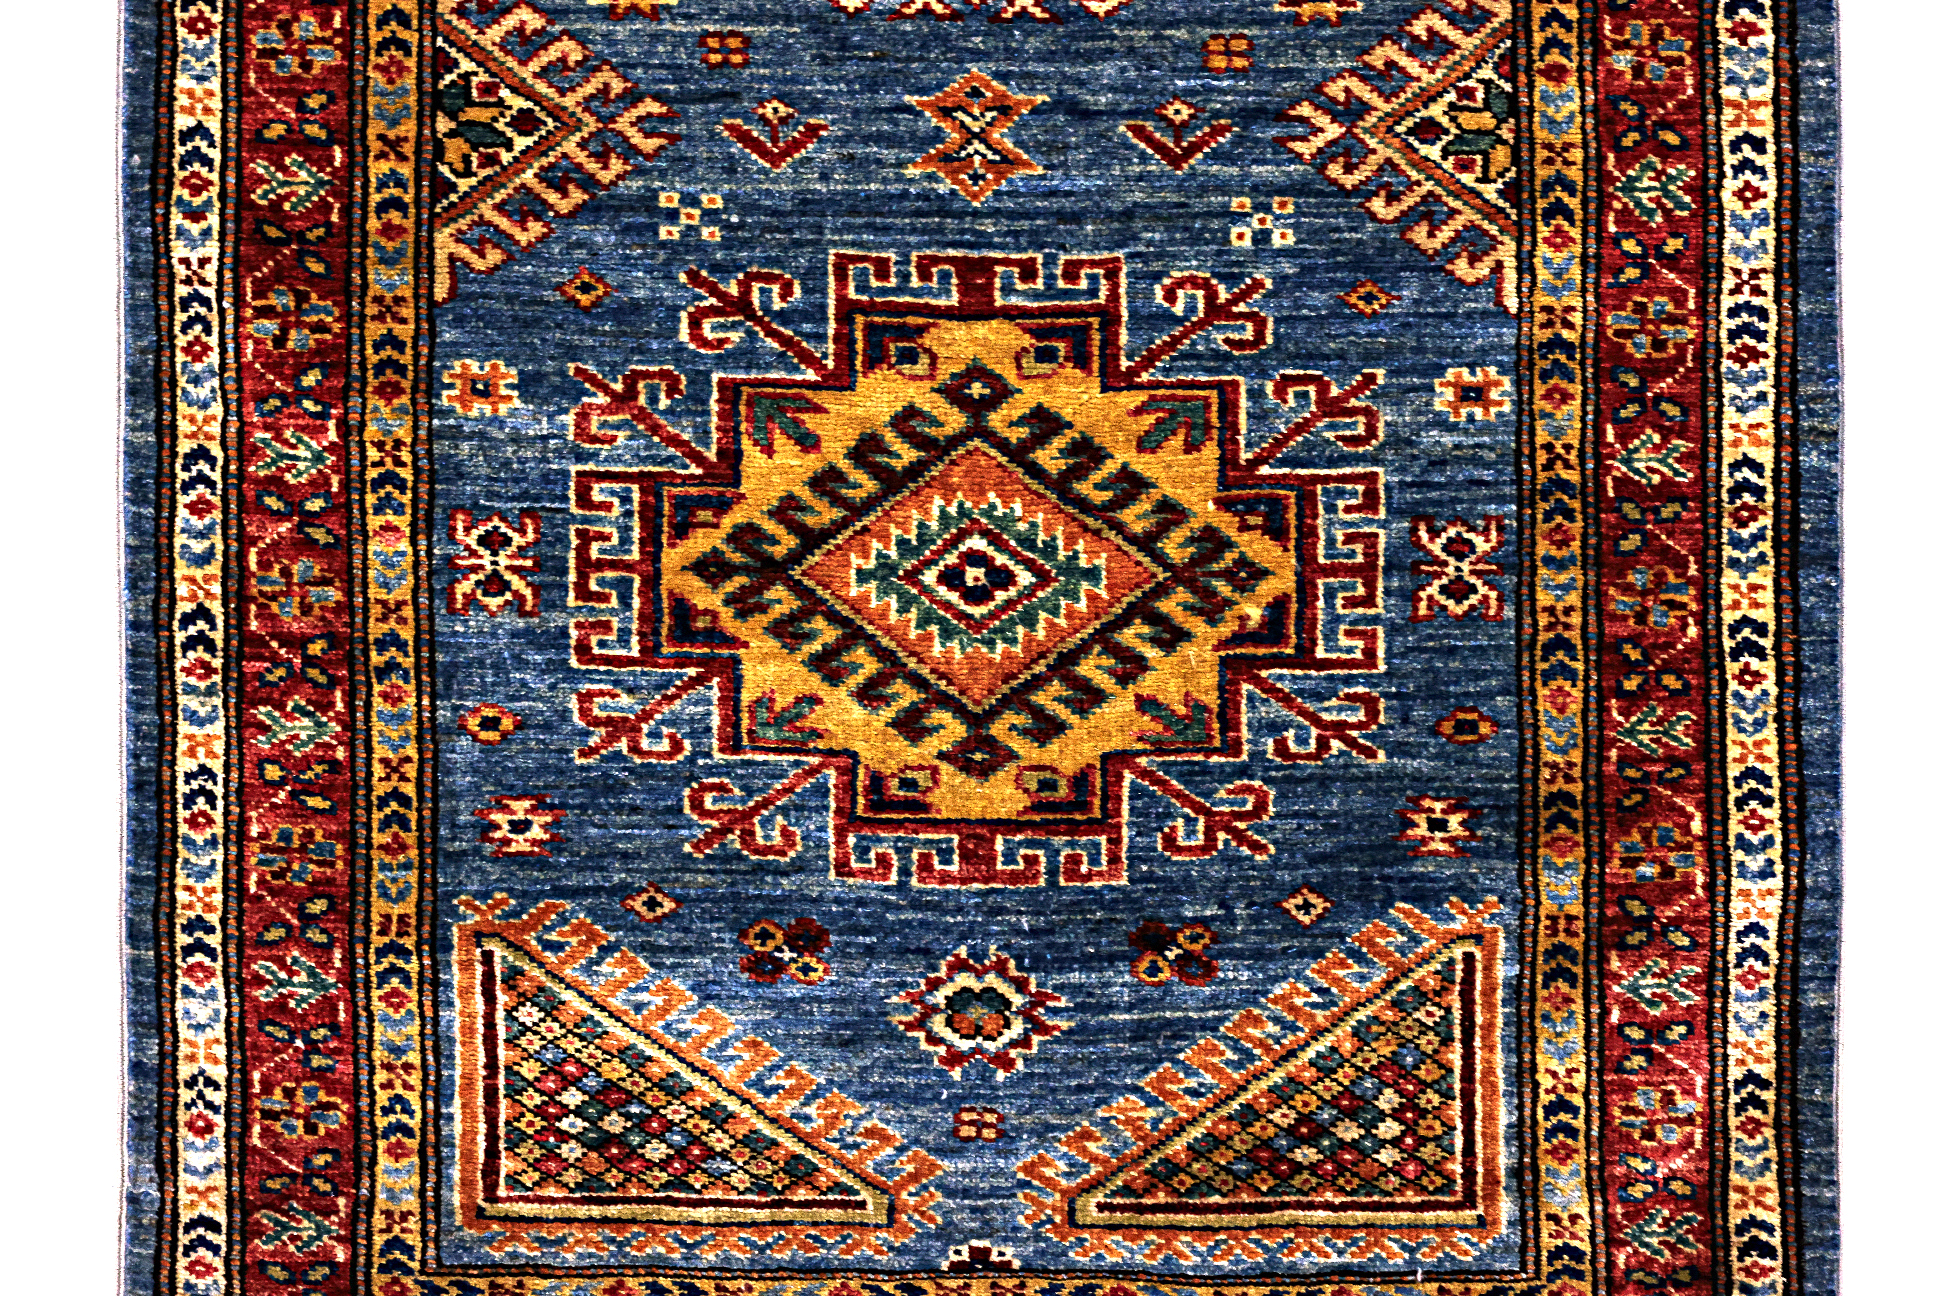 A CAUCASIAN STYLE WOOL RUNNER - Image 2 of 3